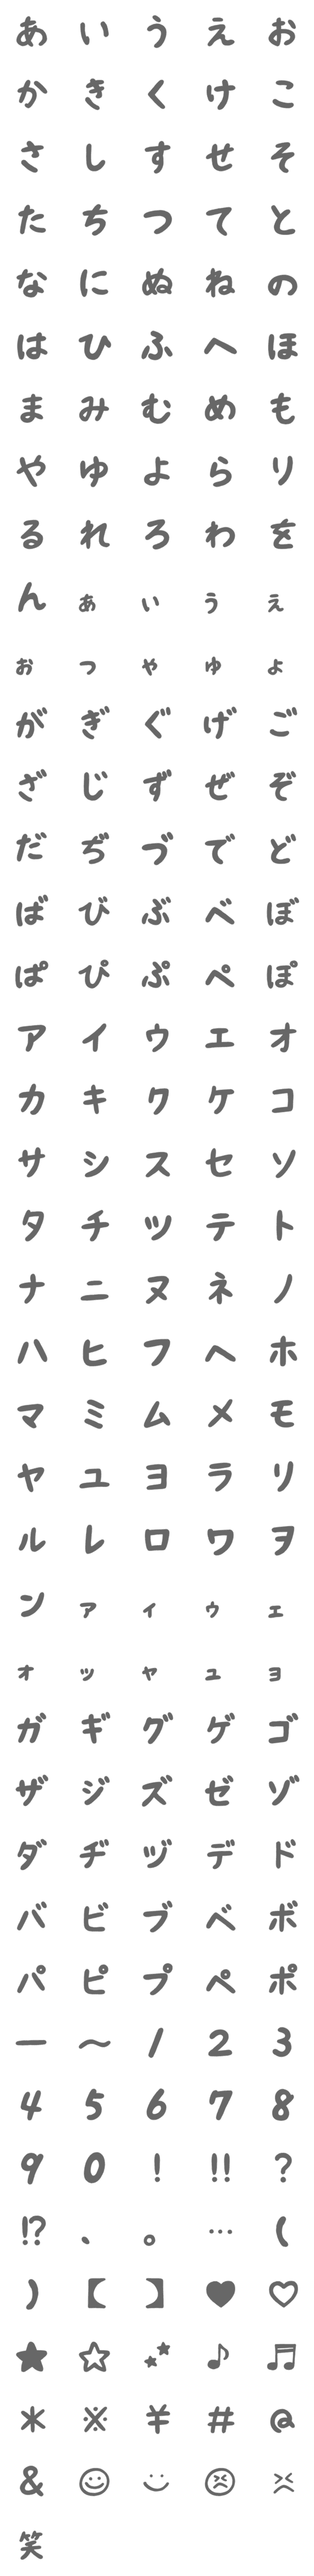 [LINE絵文字]もえ字の画像一覧